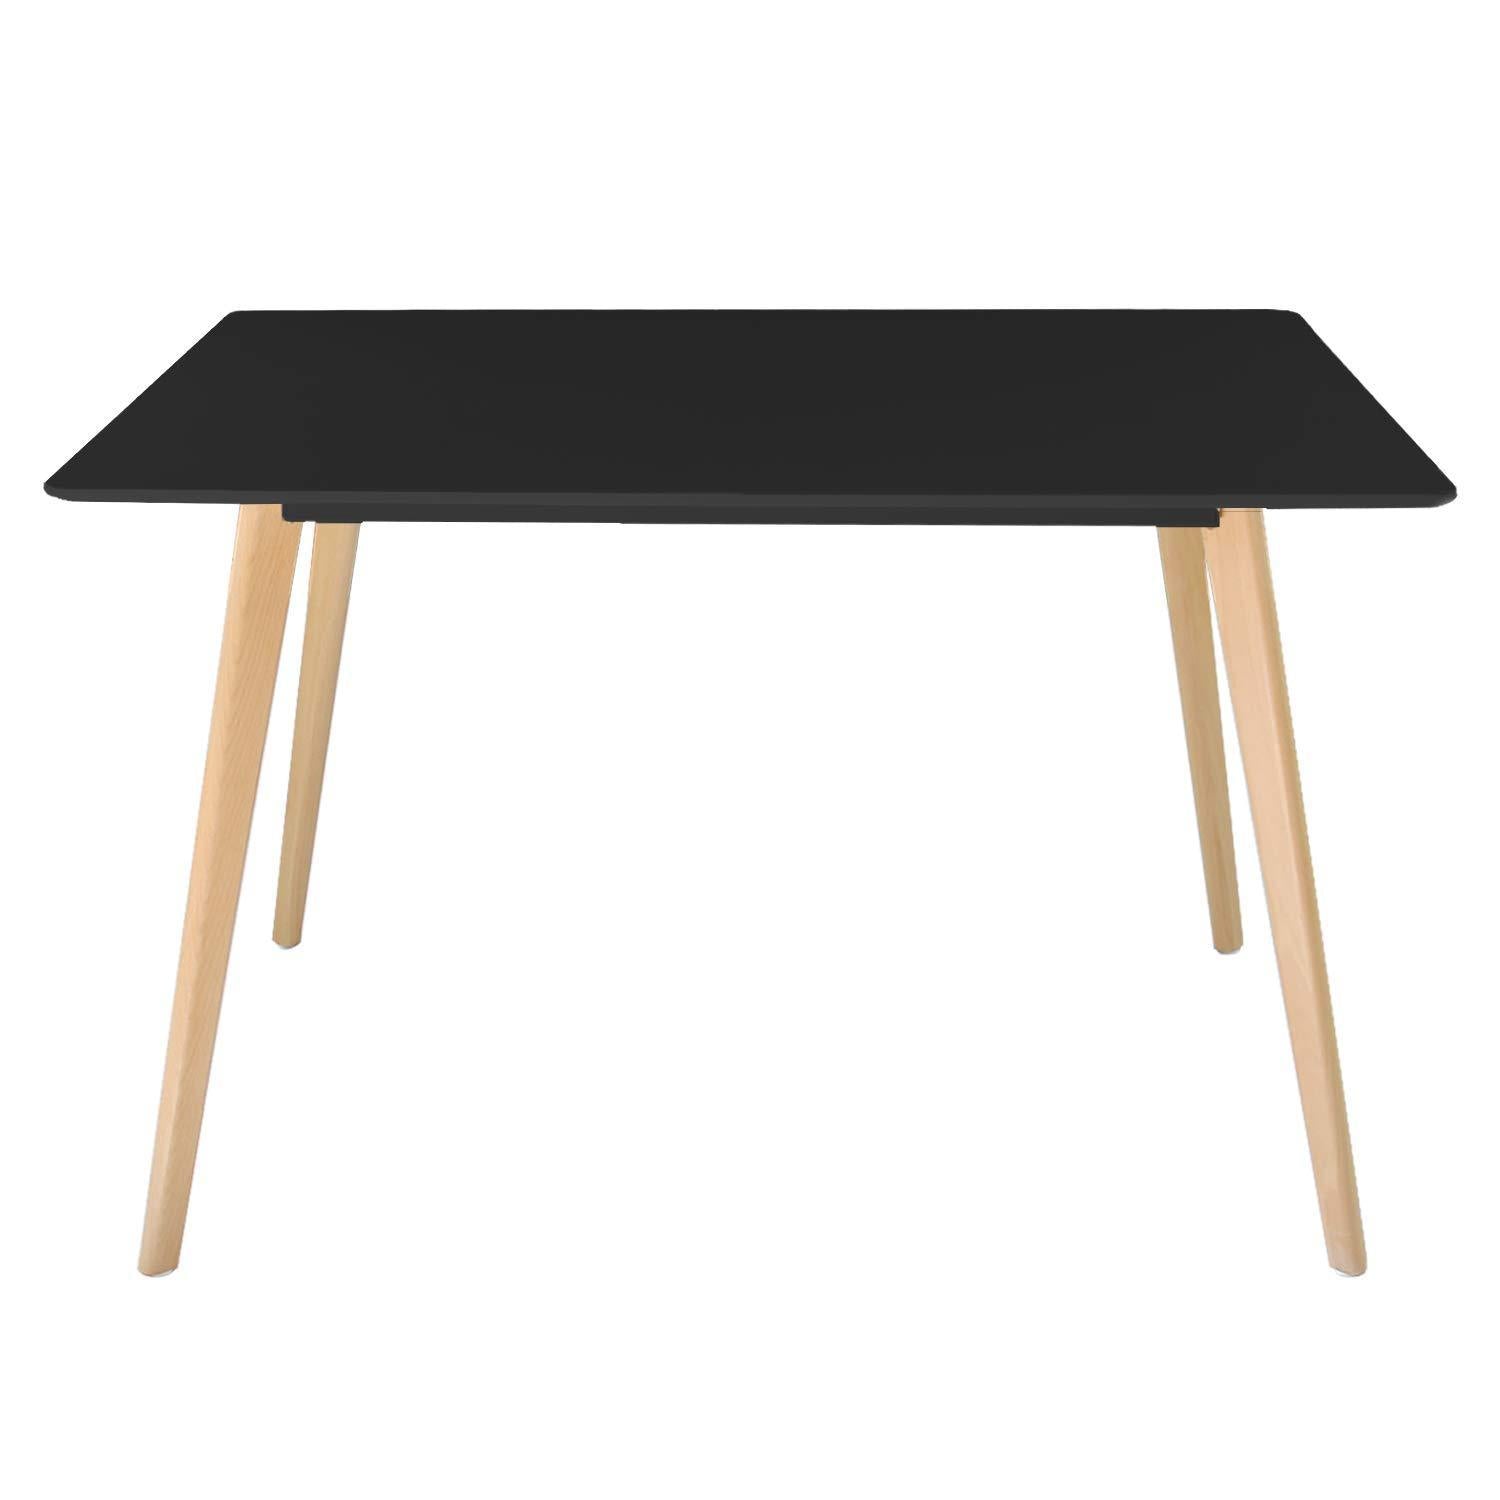 Buy now jerry maggie dinner table desk large family size with wood legs stone like polish surface multi purpose work study living room kitchen furniture decor modern fashion simple rectangle black